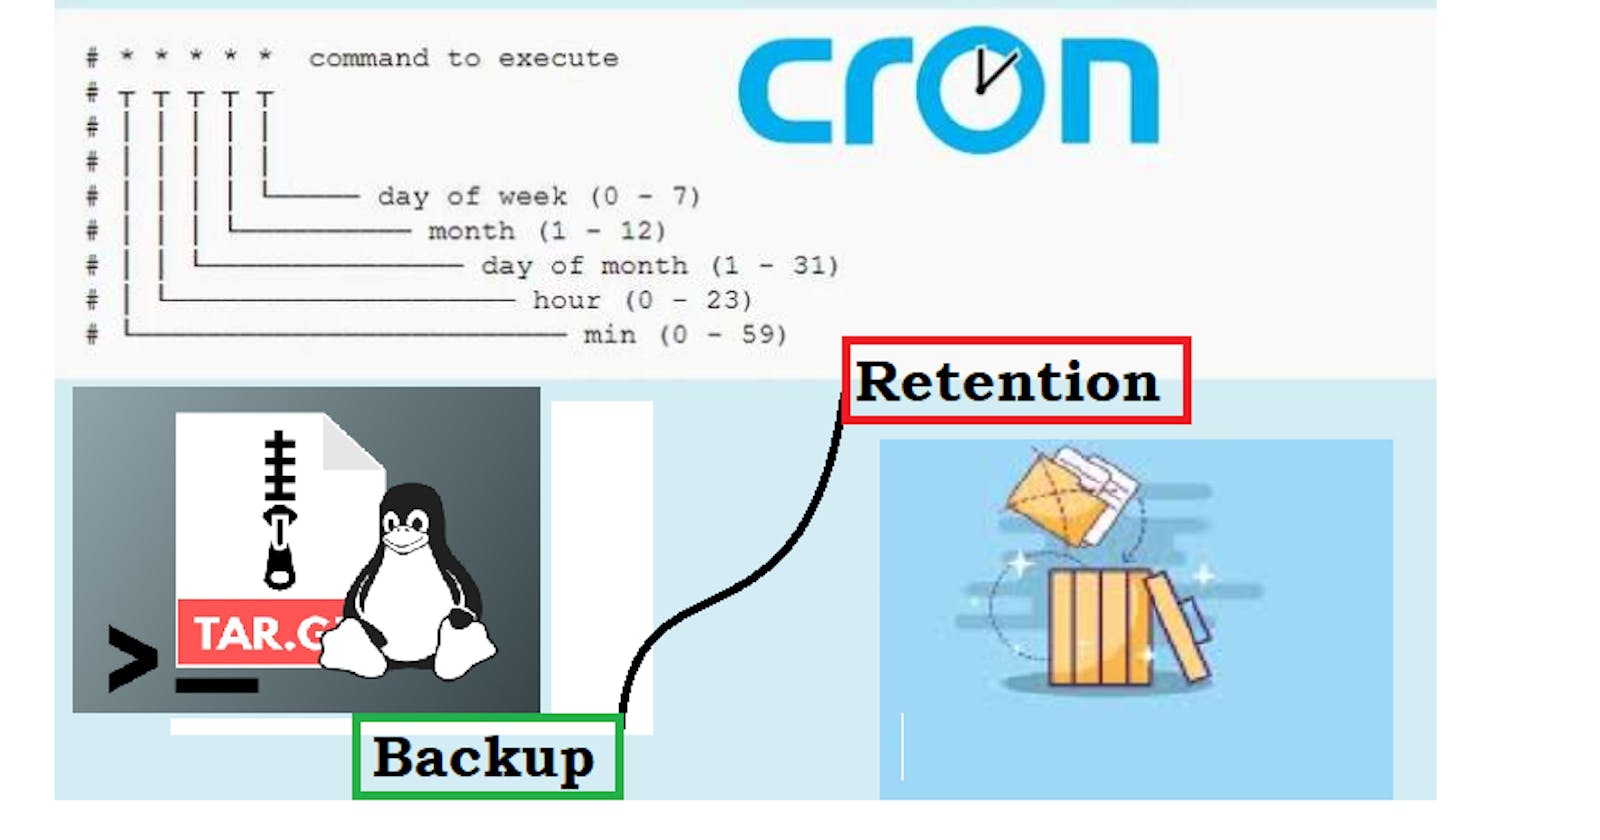 Implementing and Automating Robust Backup and Retention Strategies using shell scripts.